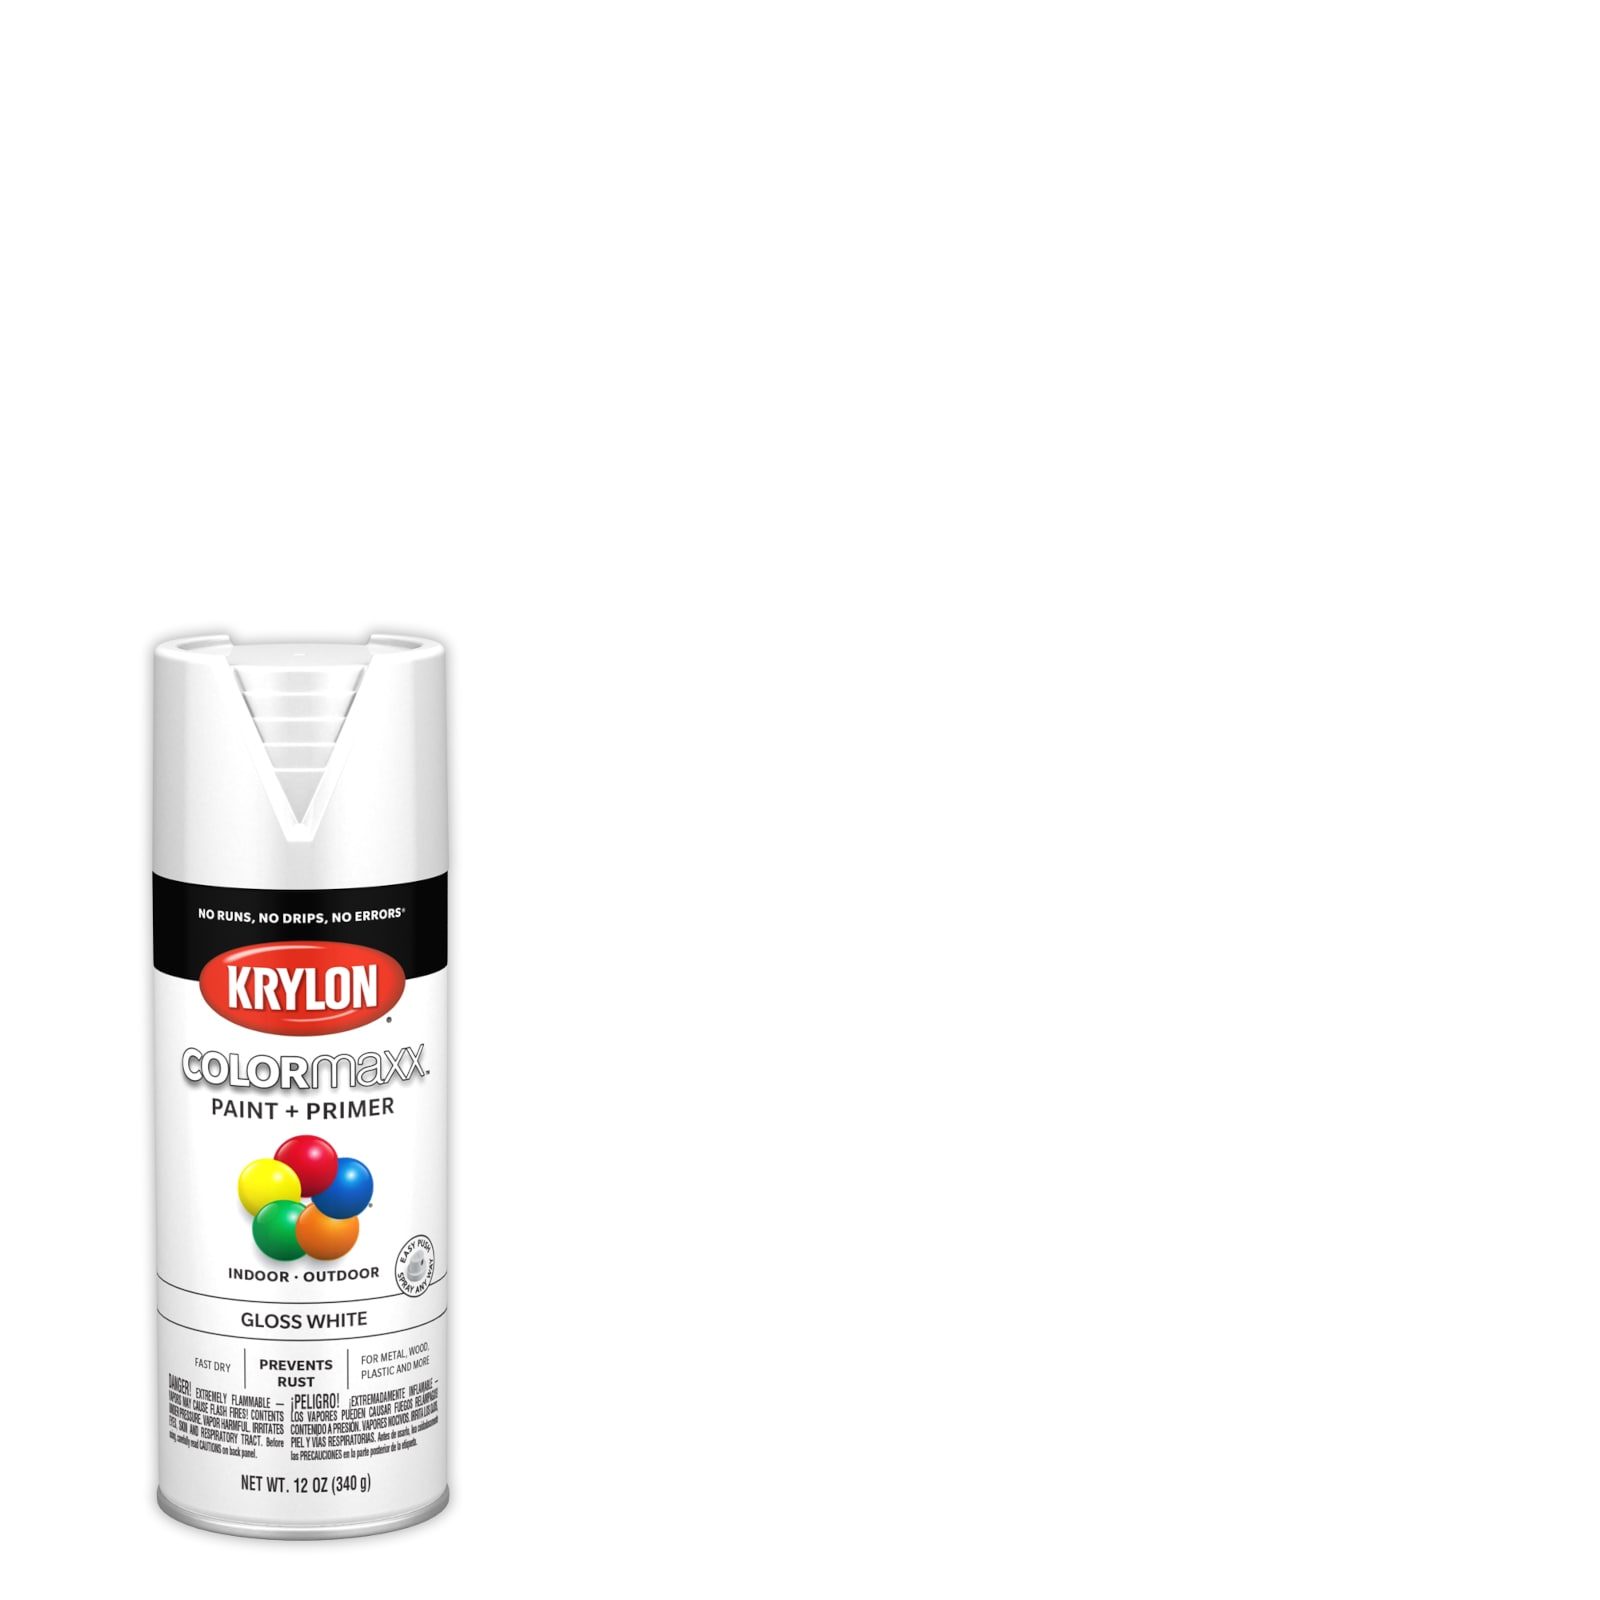 Krylon COLORmaxx Gloss White Spray Paint and Primer In One (NET WT